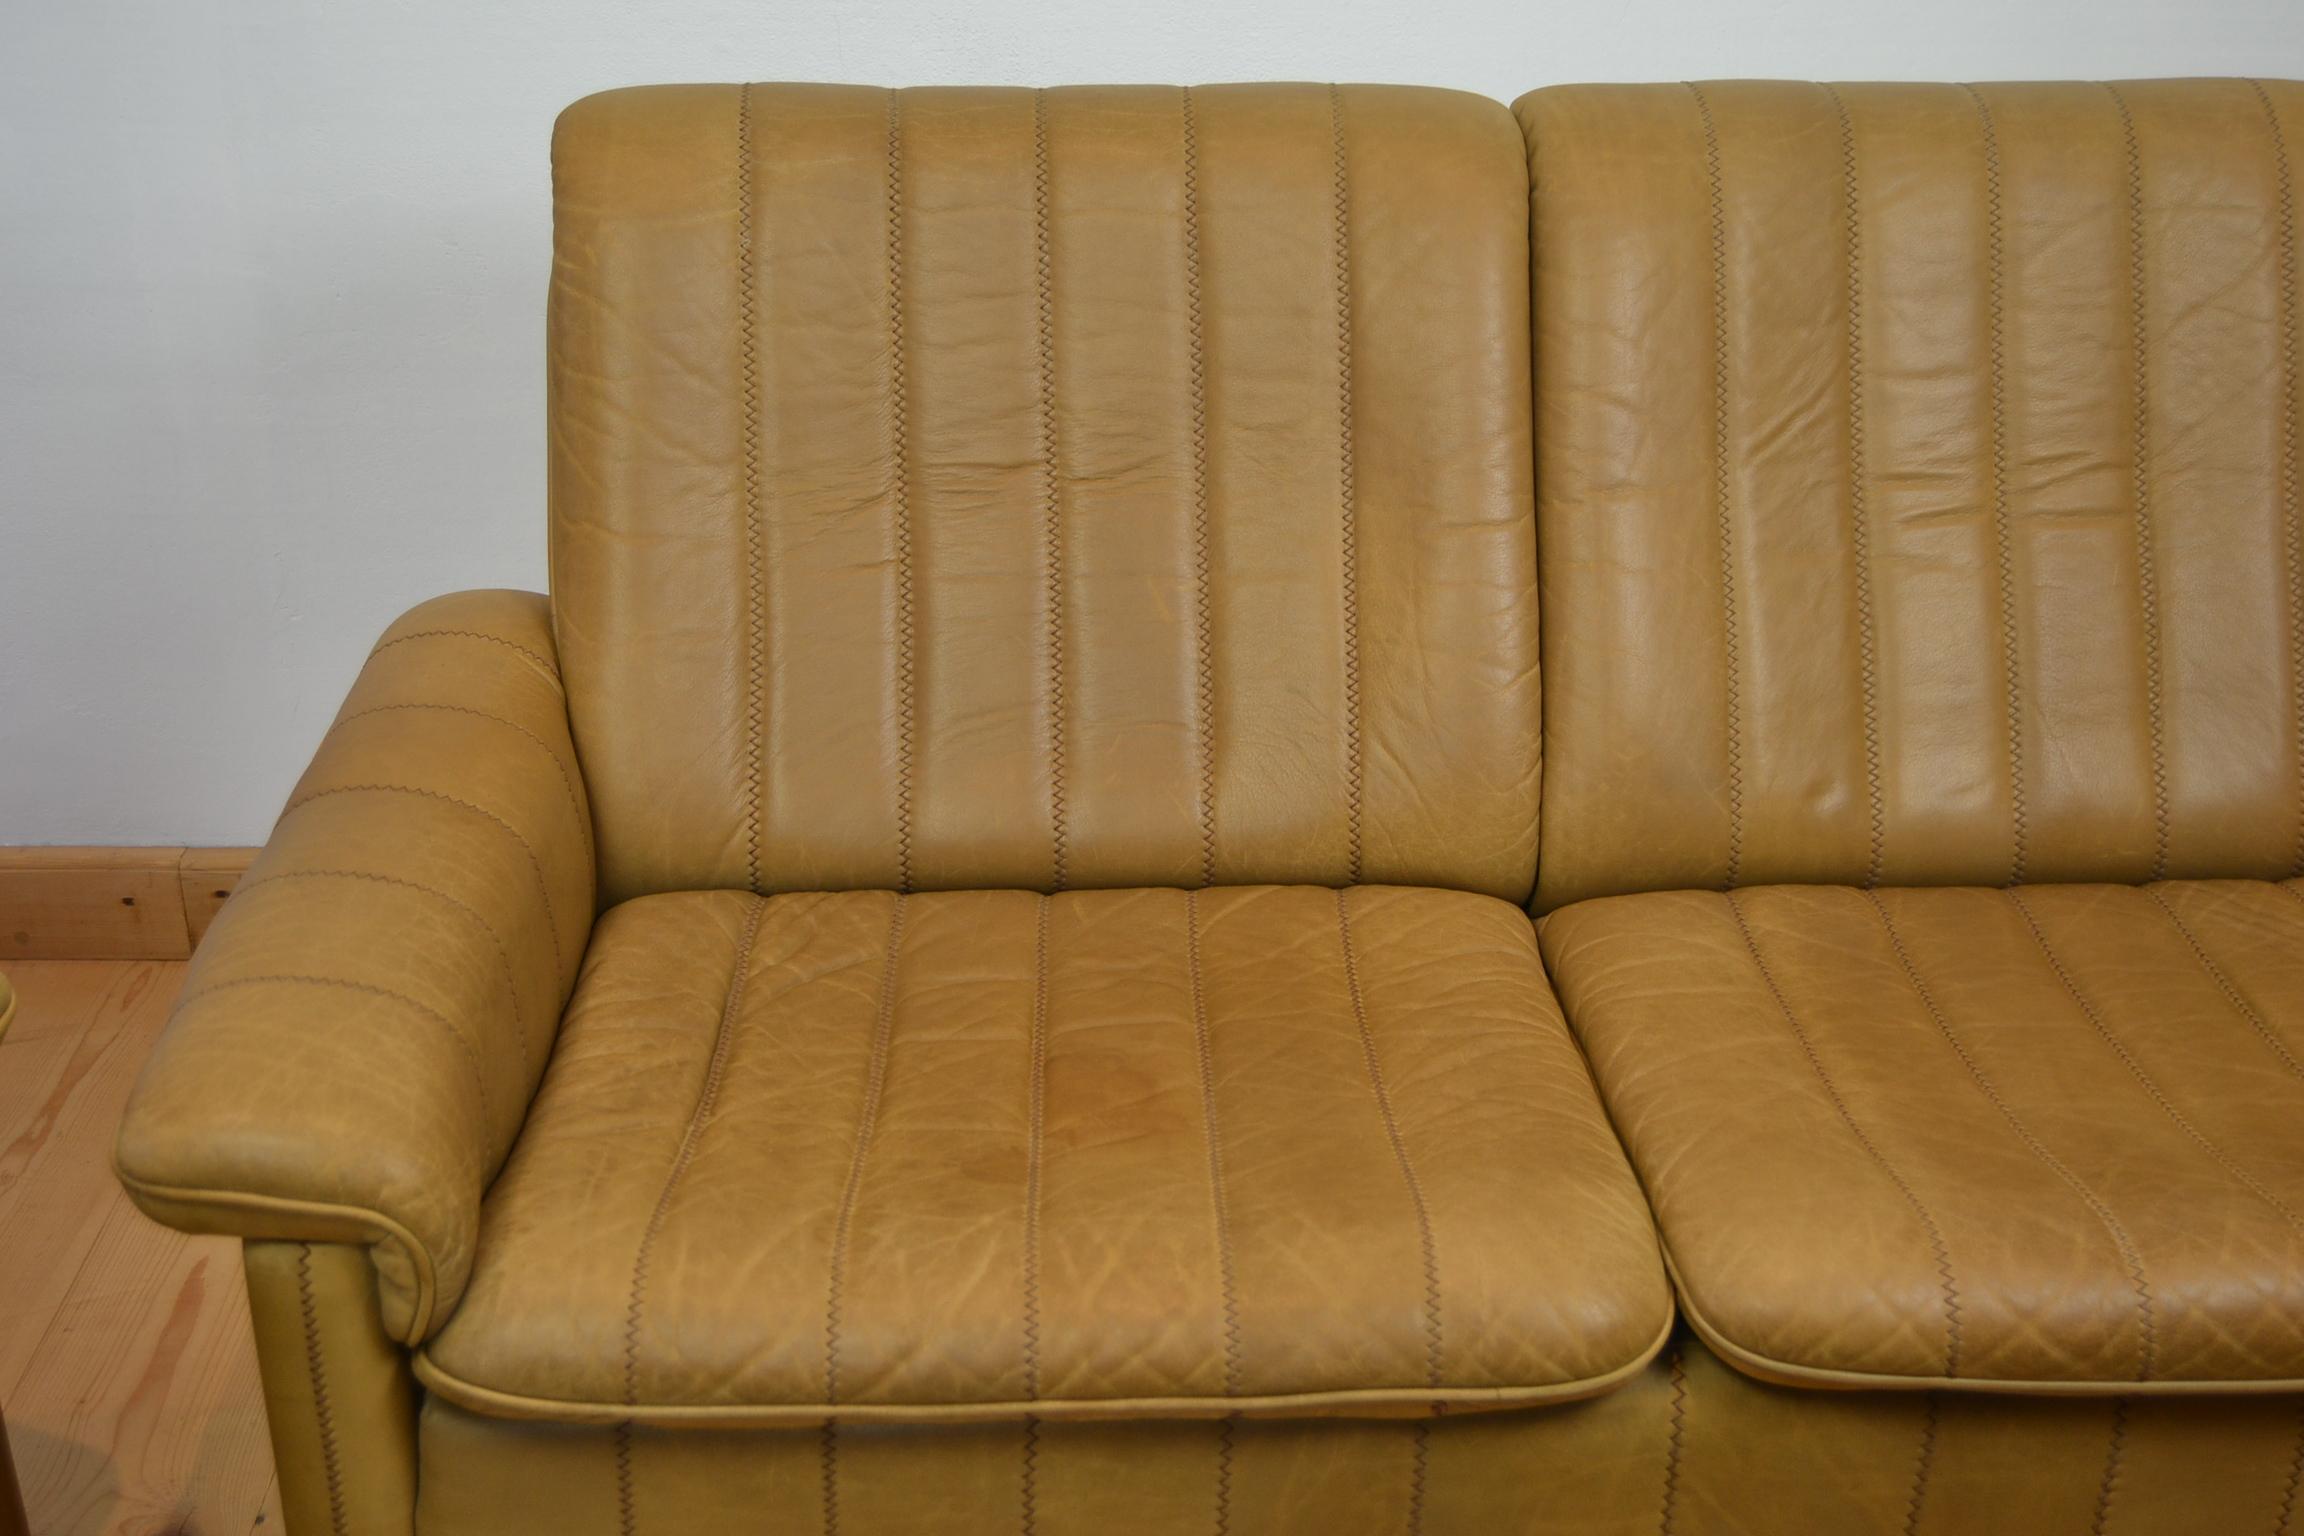 20th Century Vintage De Sede Living Room Set, 2 Lounge Chairs and Sofa, Brown Leather